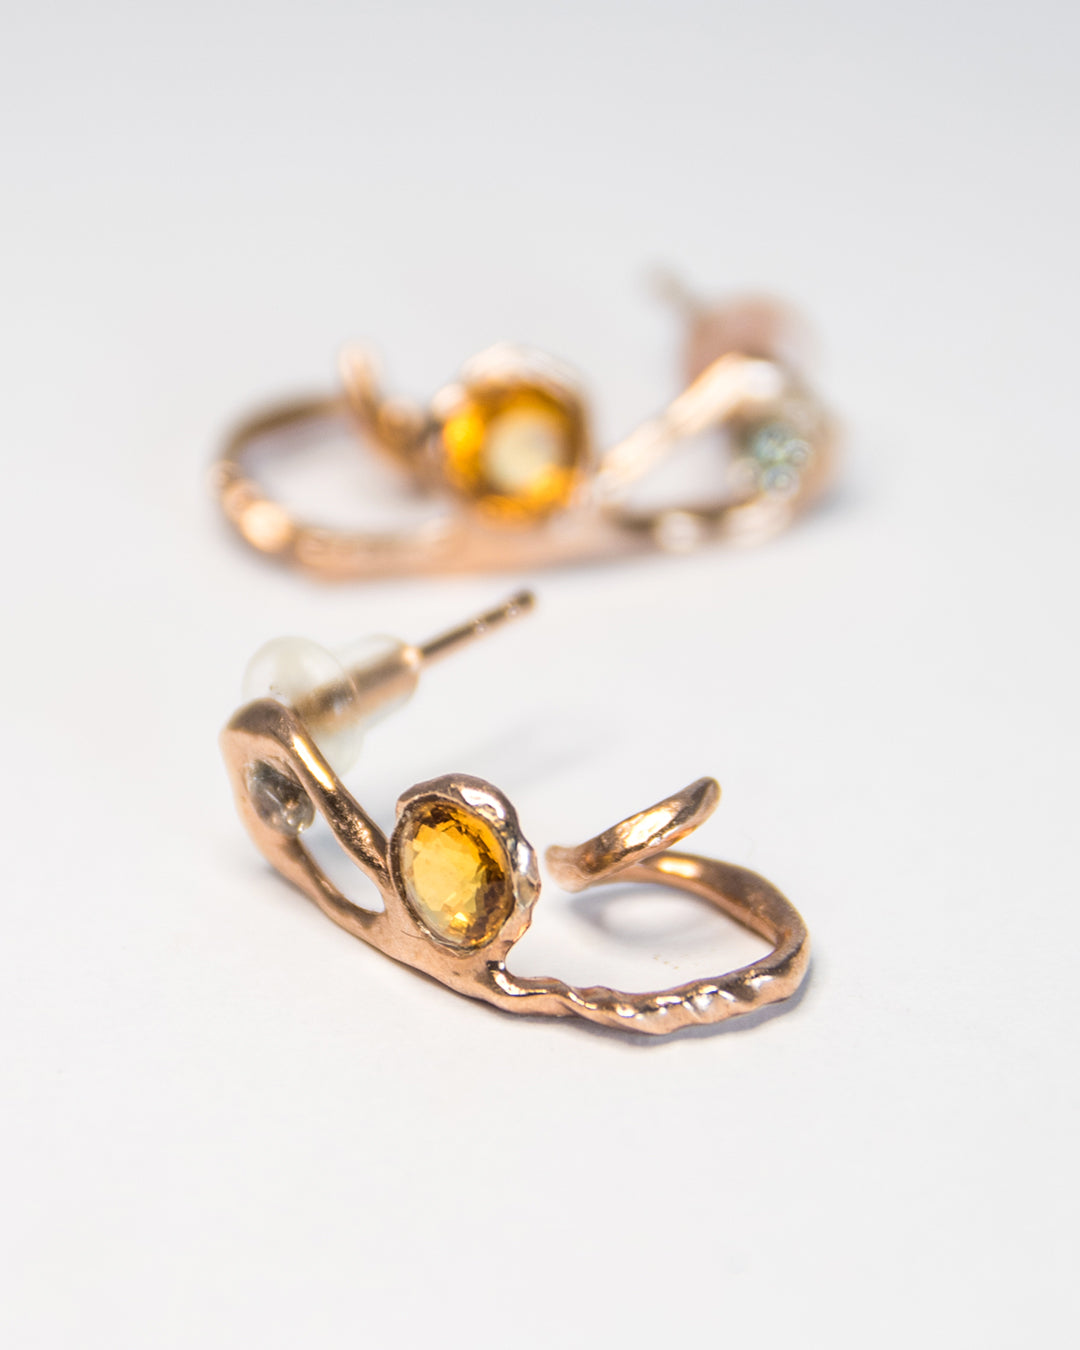 Signature 18K Rose Gold Earring Hooks with Citrine and Dusty Diamonds